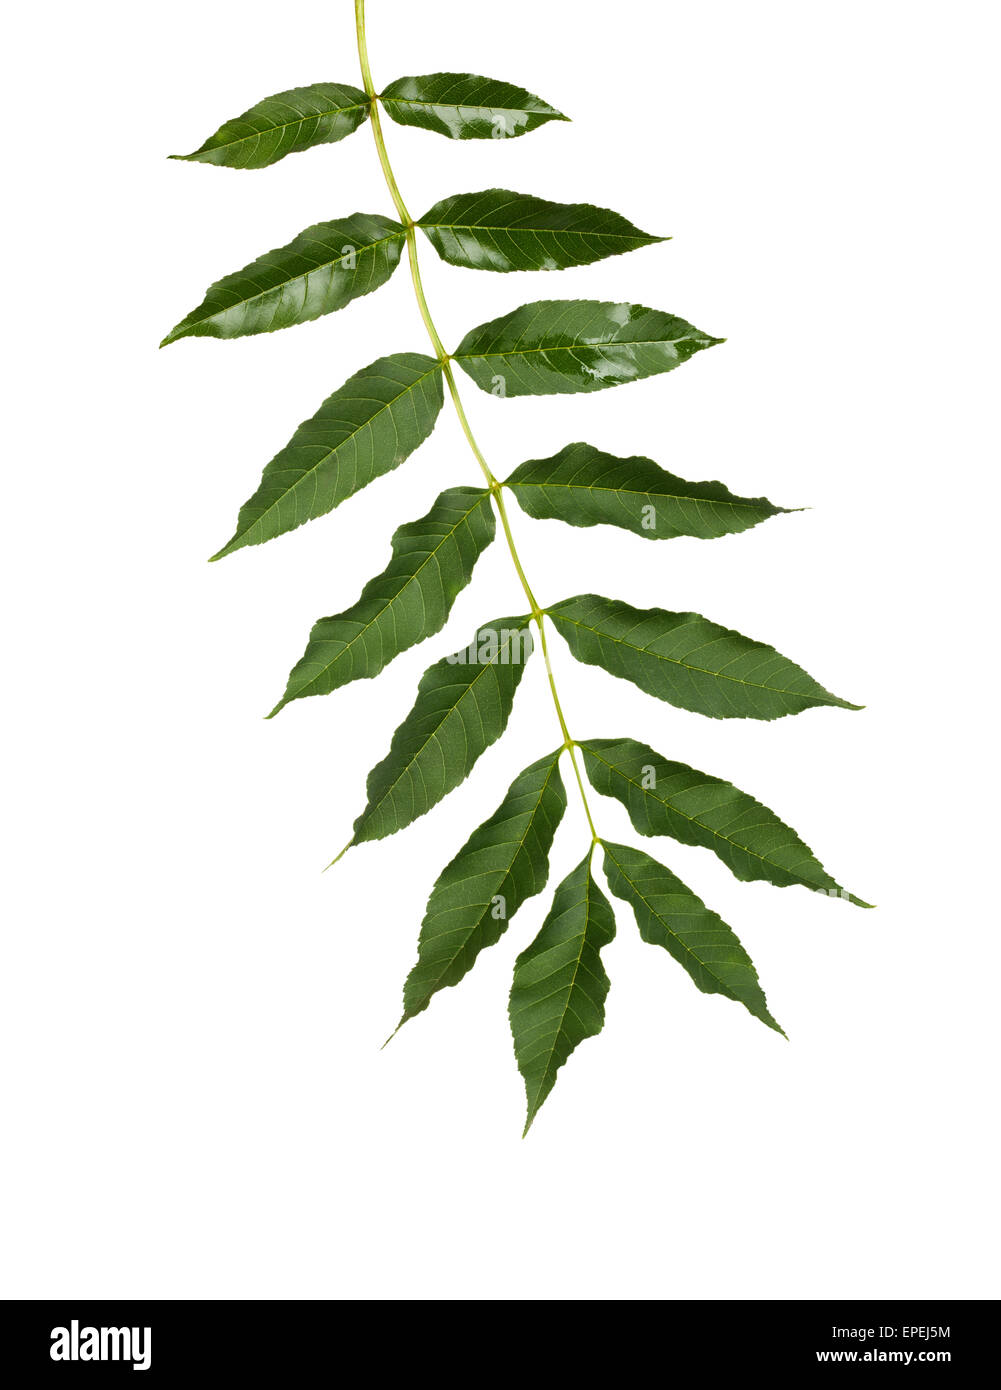 Branch with green leaves isolated on white background Stock Photo